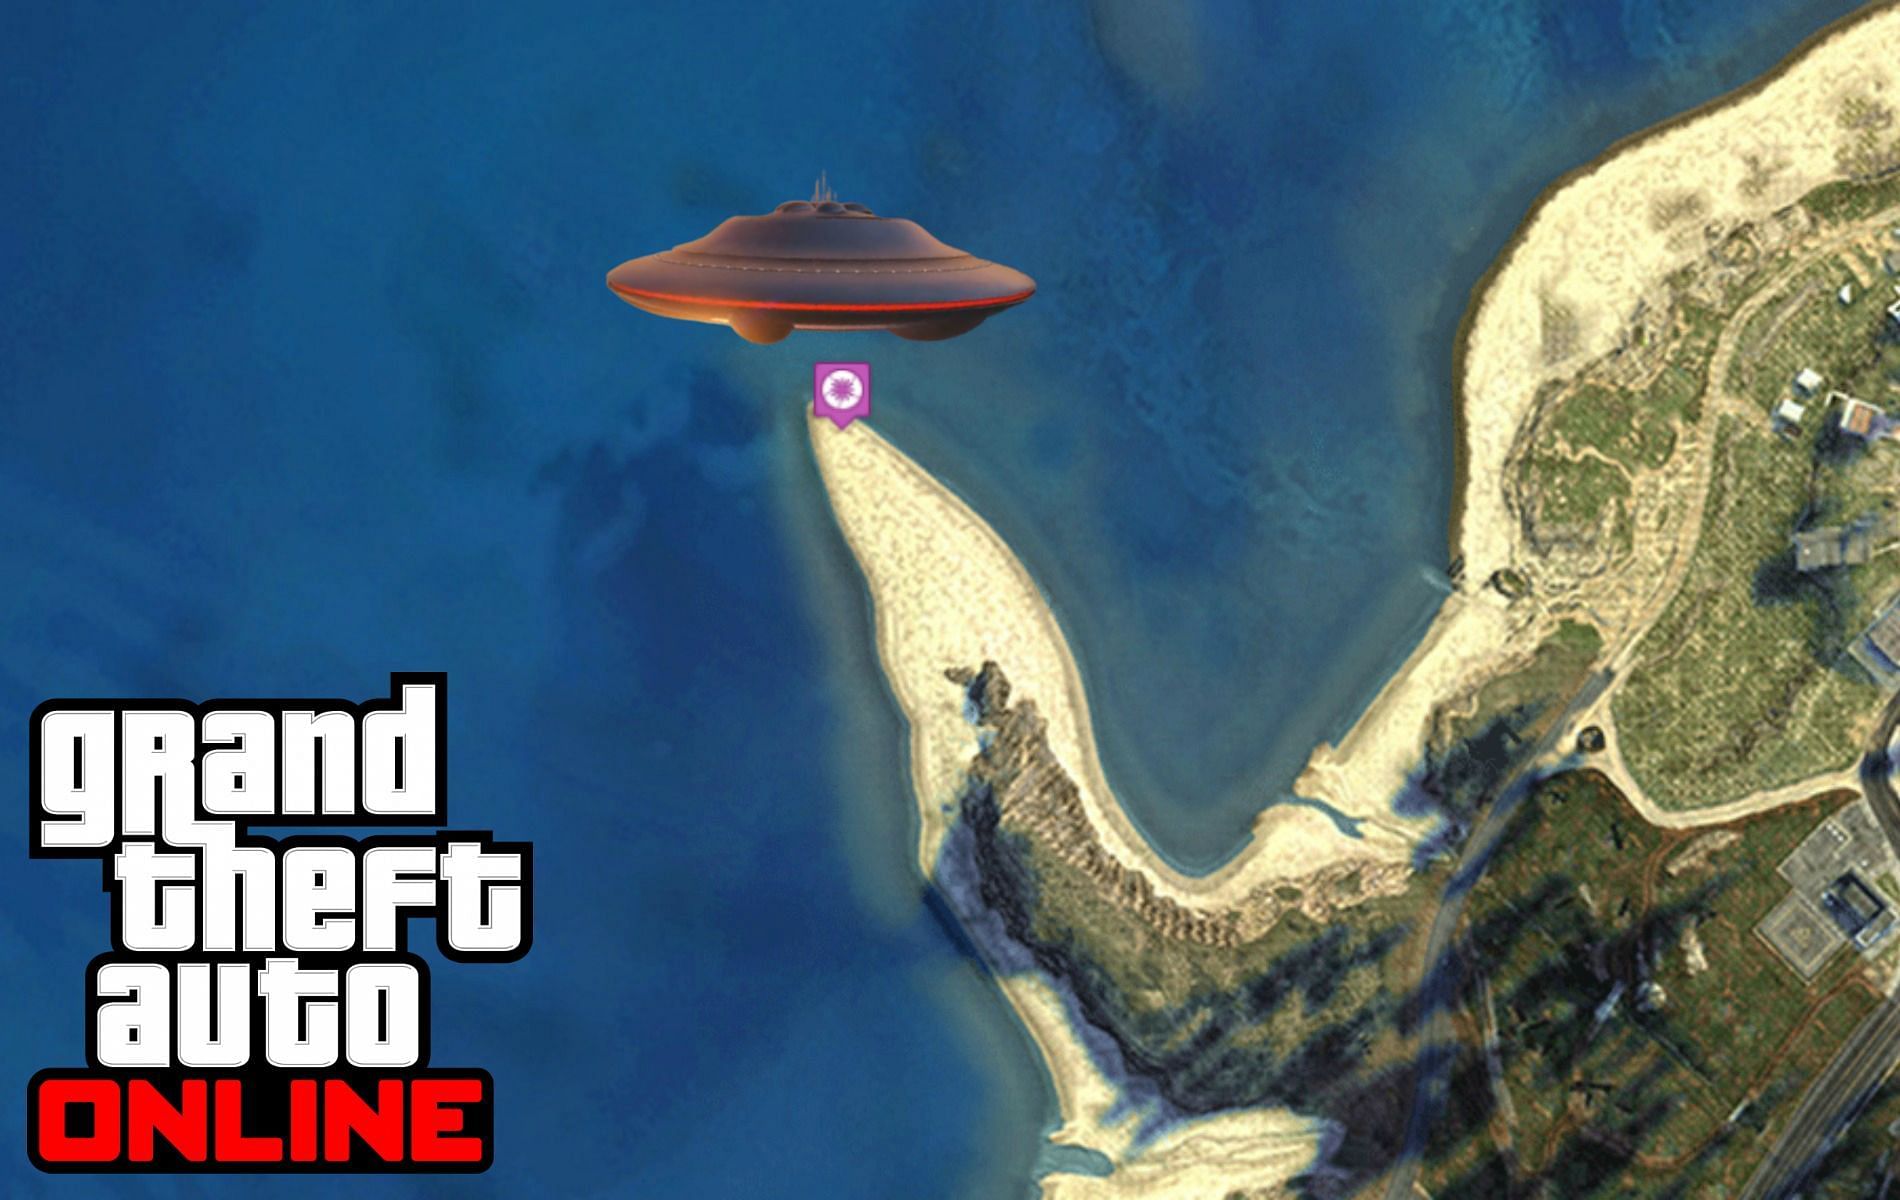 Locations of UFO in GTA Online Sightseeing event explored